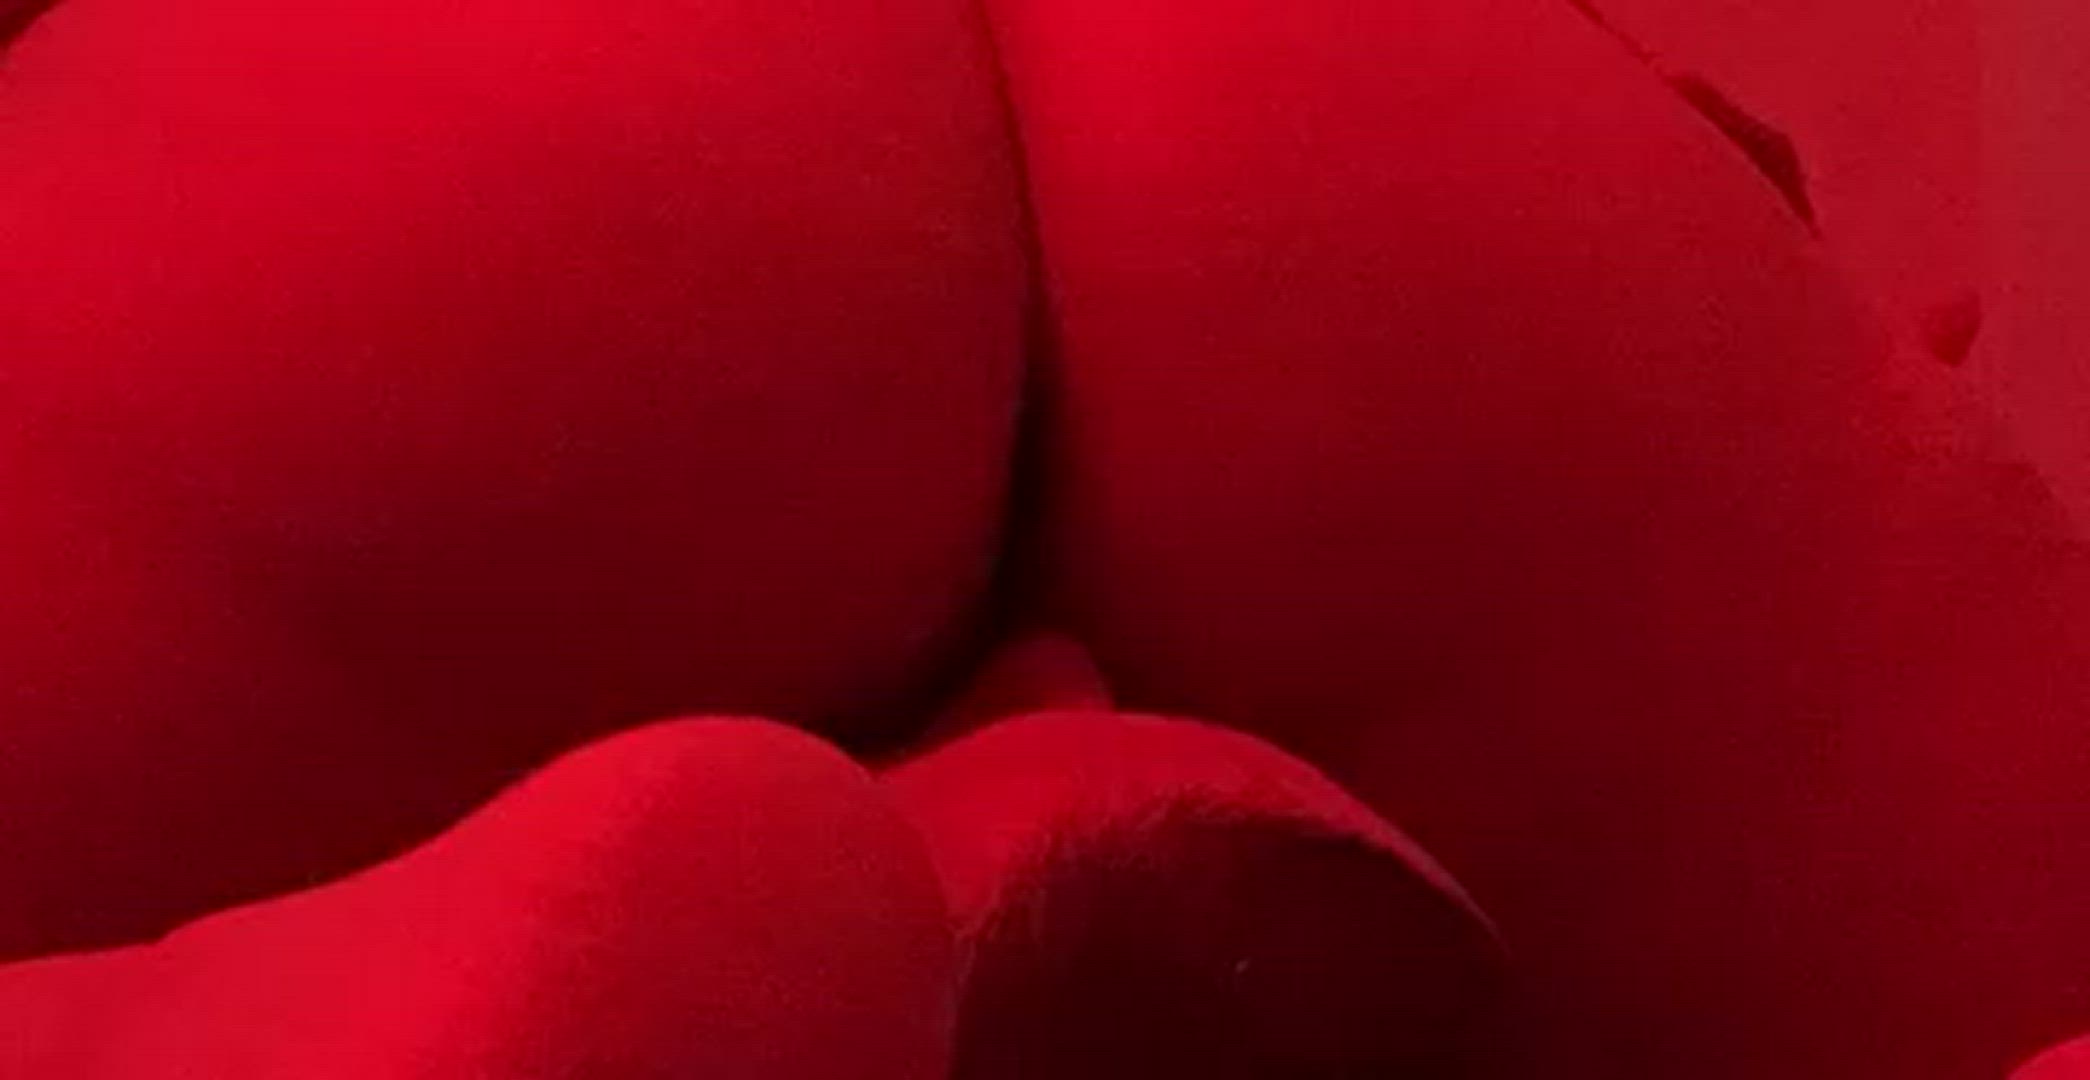 Ass porn video with onlyfans model DarrienAndClaire <strong>@darrien1212</strong>